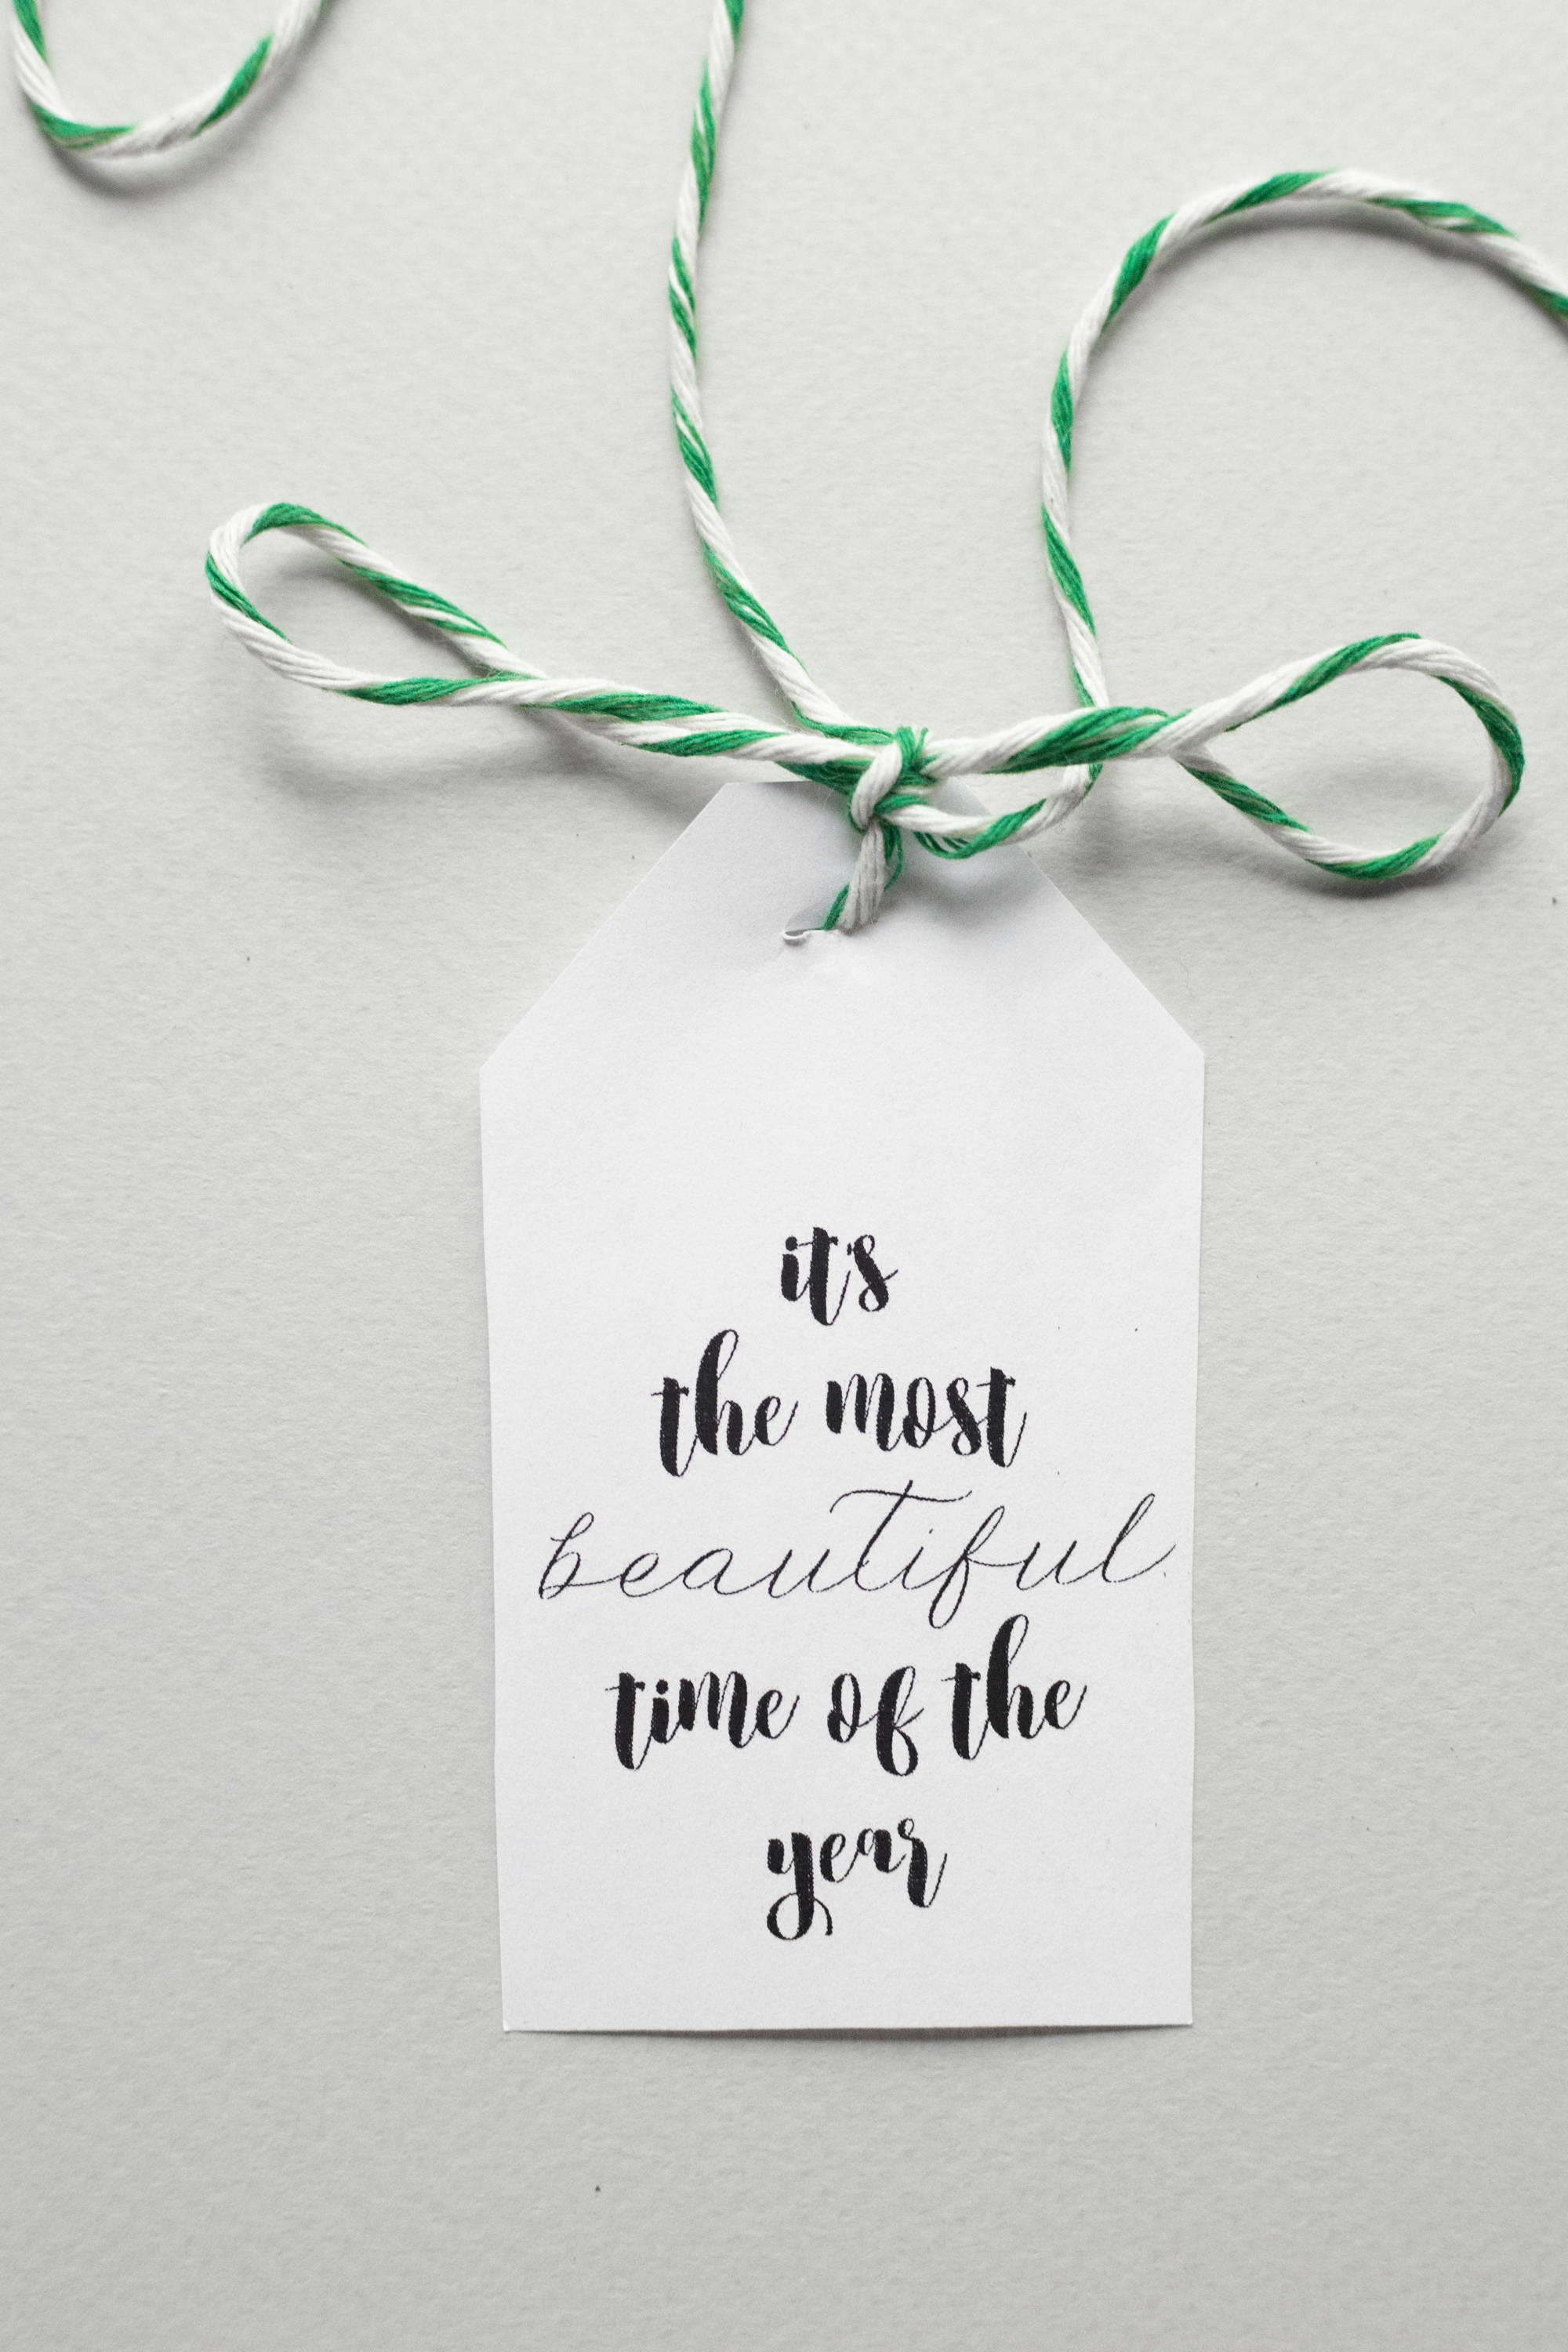 A gift tag that reads “It’s the most beautiful time of the year.”